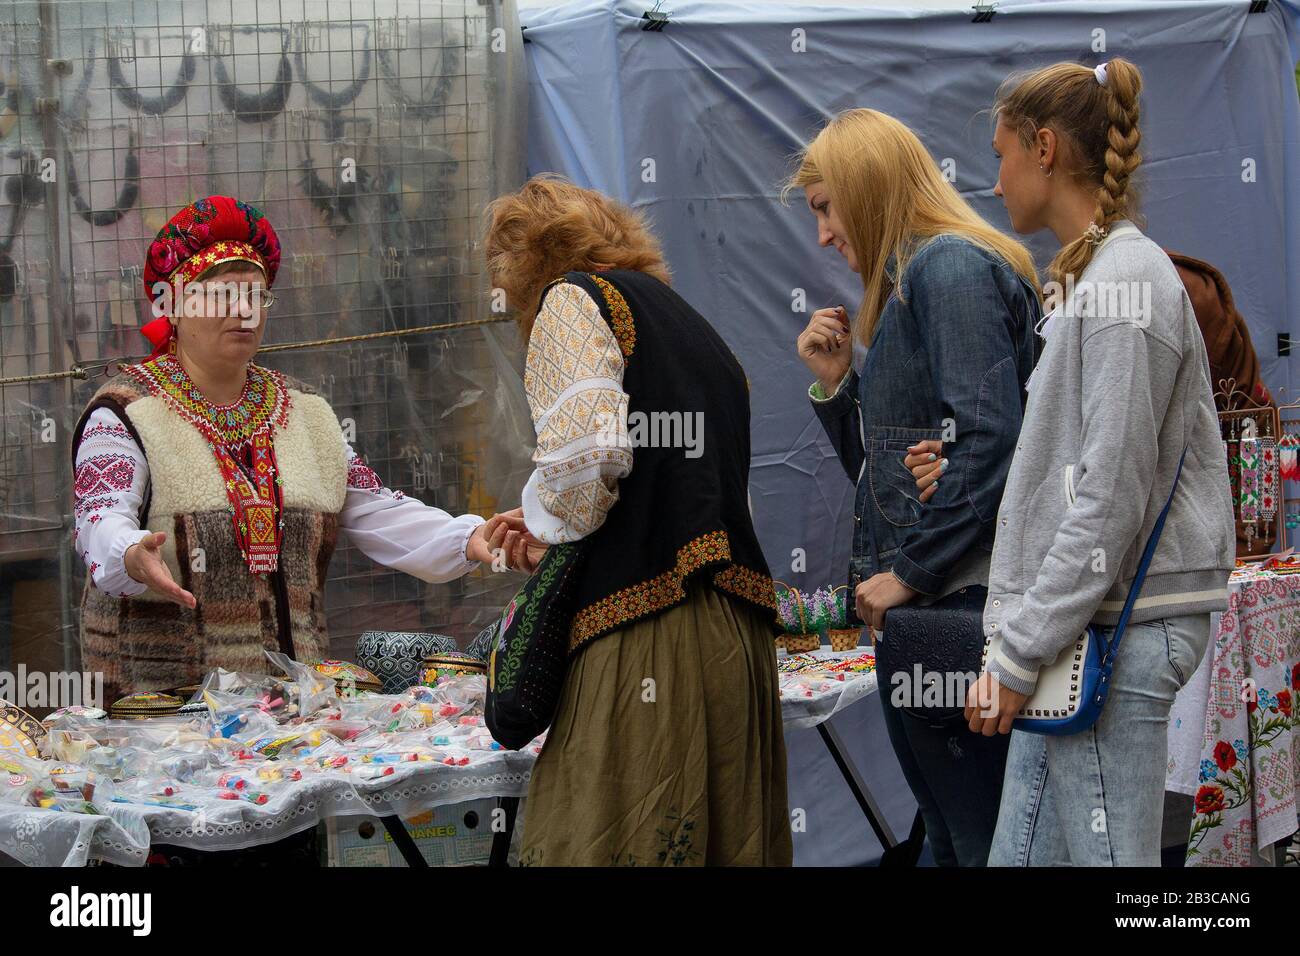 Kiev, Ukraine - August 24, 2016: Woman in embroidery sells souvenirs on the street St. Andrew's descent - the historic center of the city Stock Photo